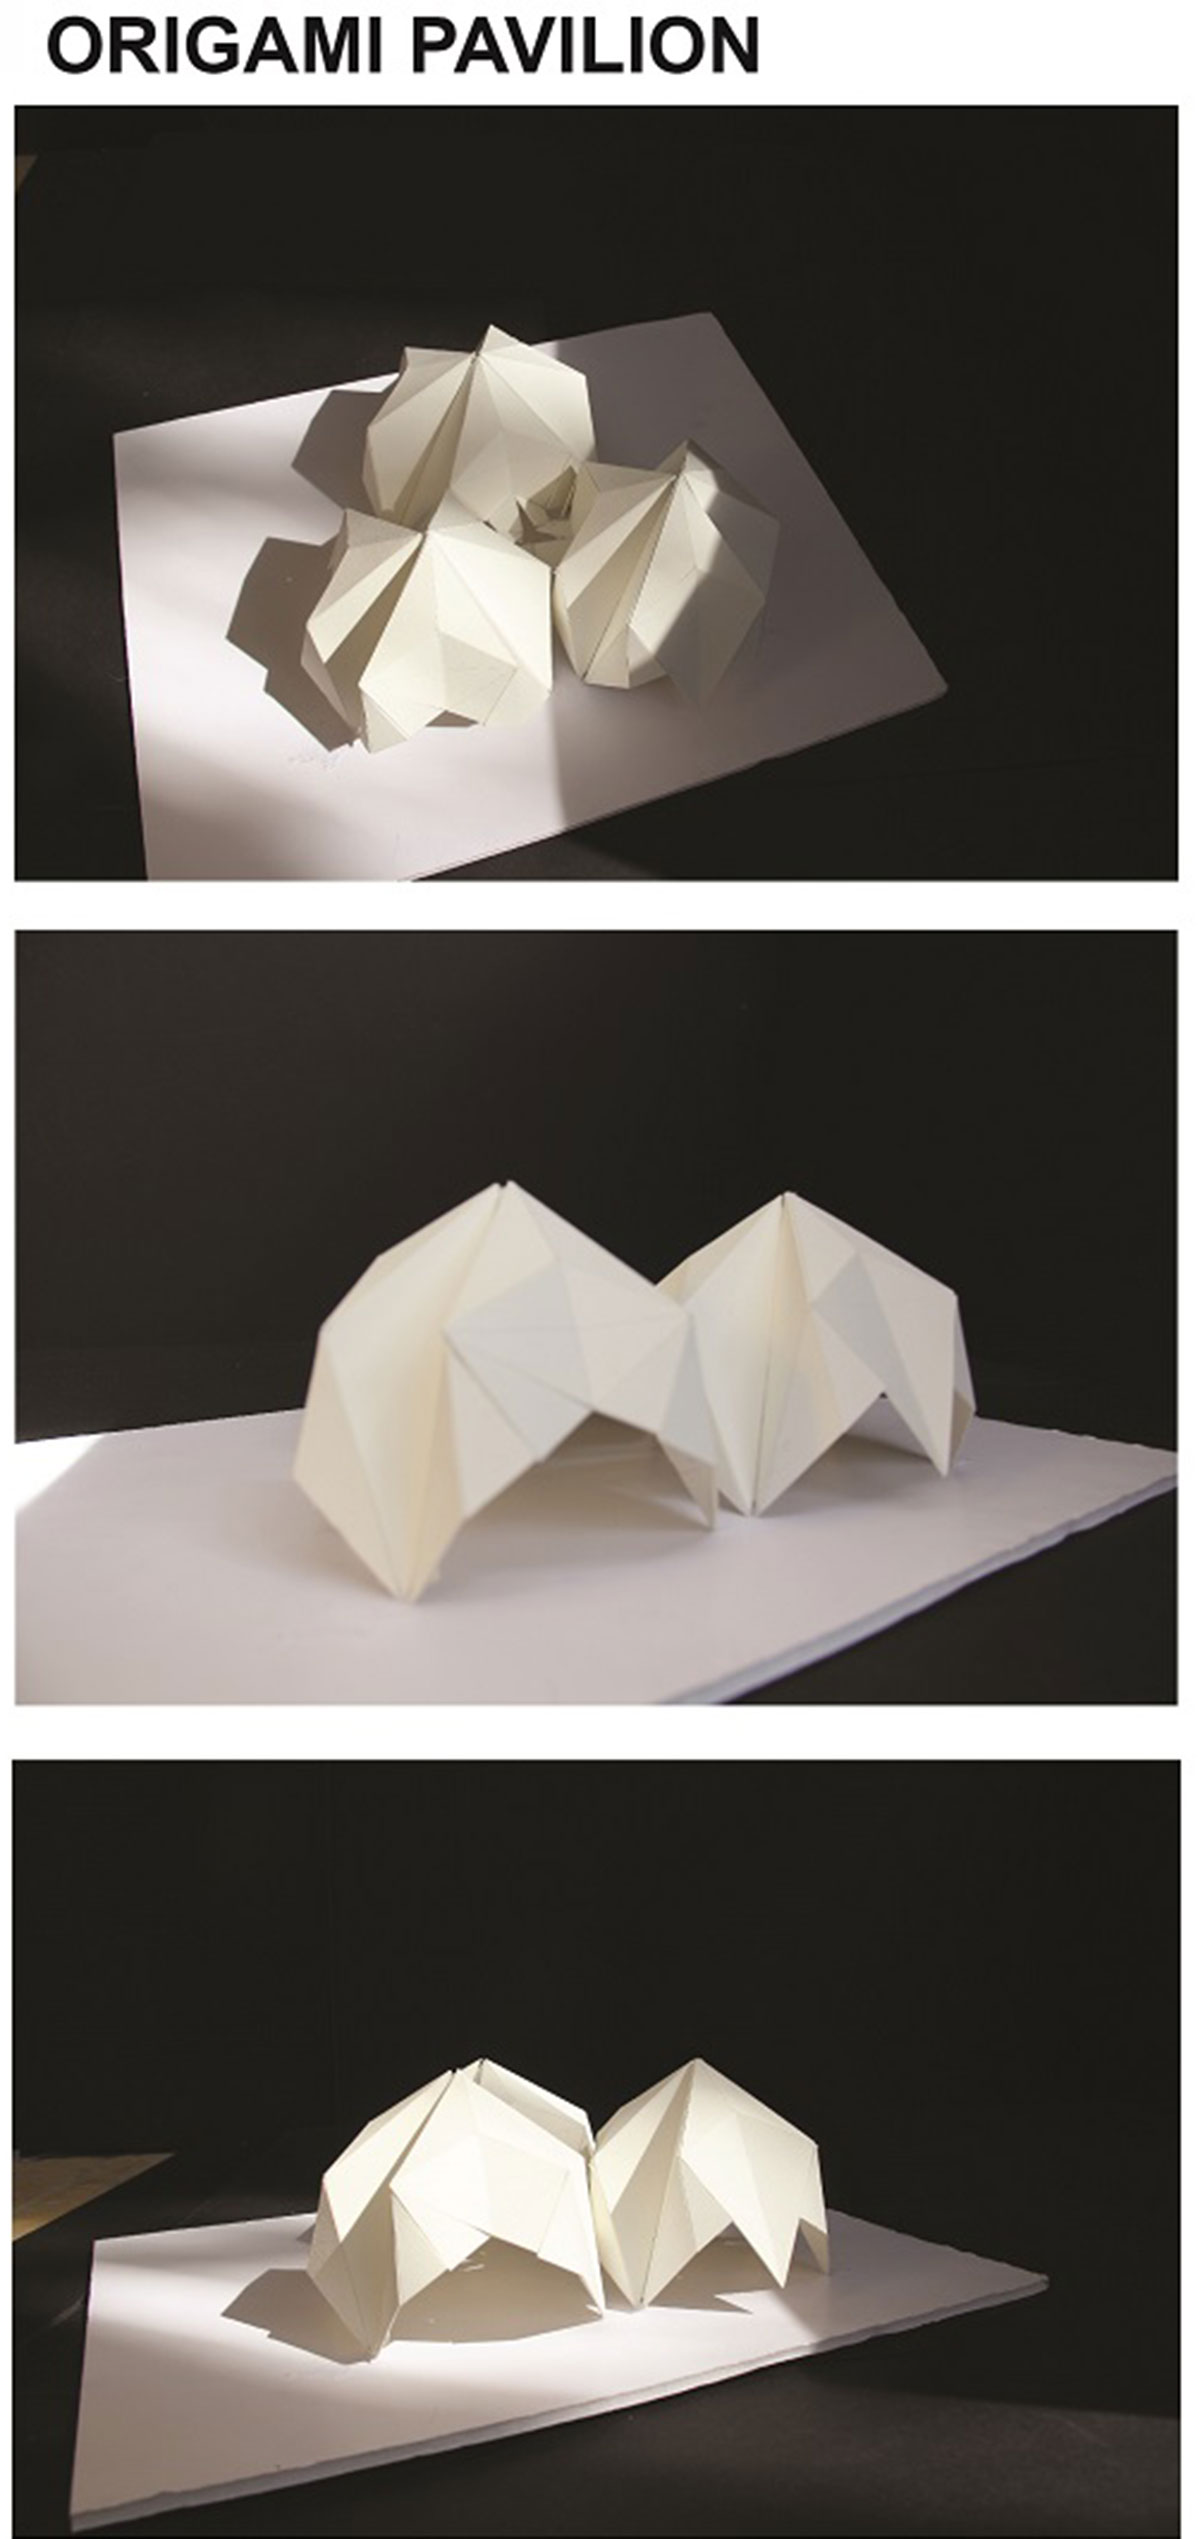 Result Announced: Origamitecture -Paper powered architecture ideas